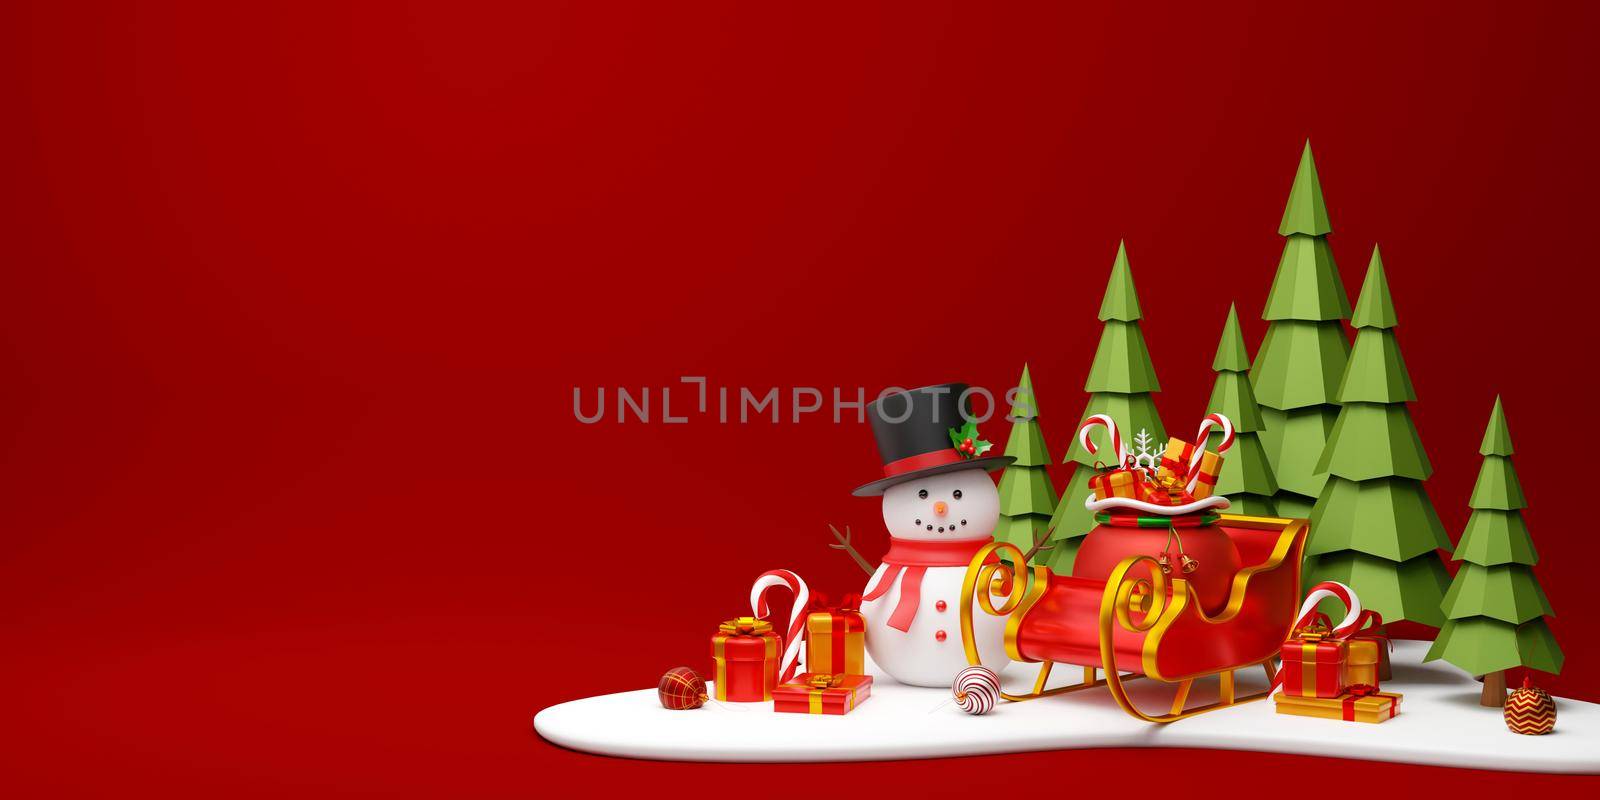 Christmas banner of Snowman and sleigh with presents, 3d illustration by nutzchotwarut